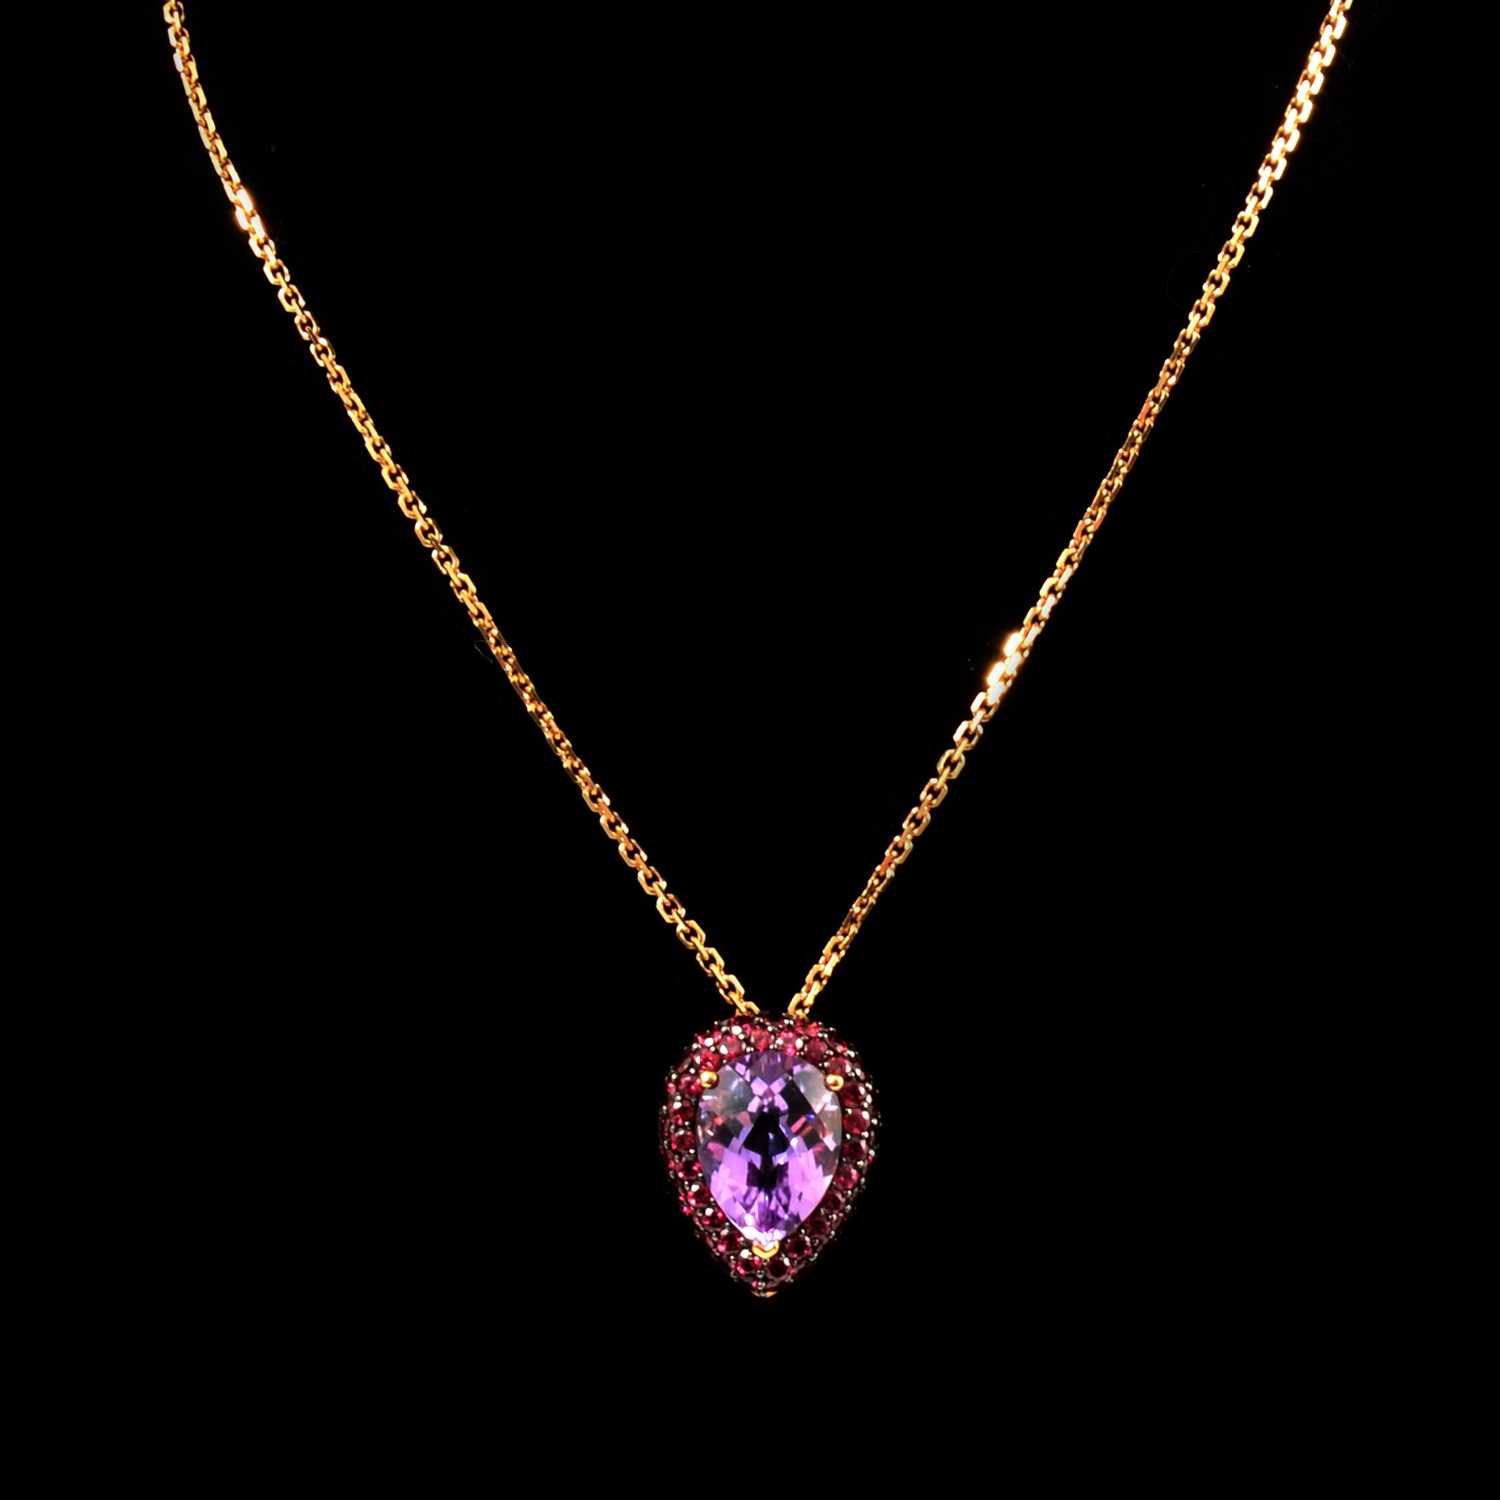 Lot 129 - An amethyst and pink stone pendant on 9 carat yellow gold chain.